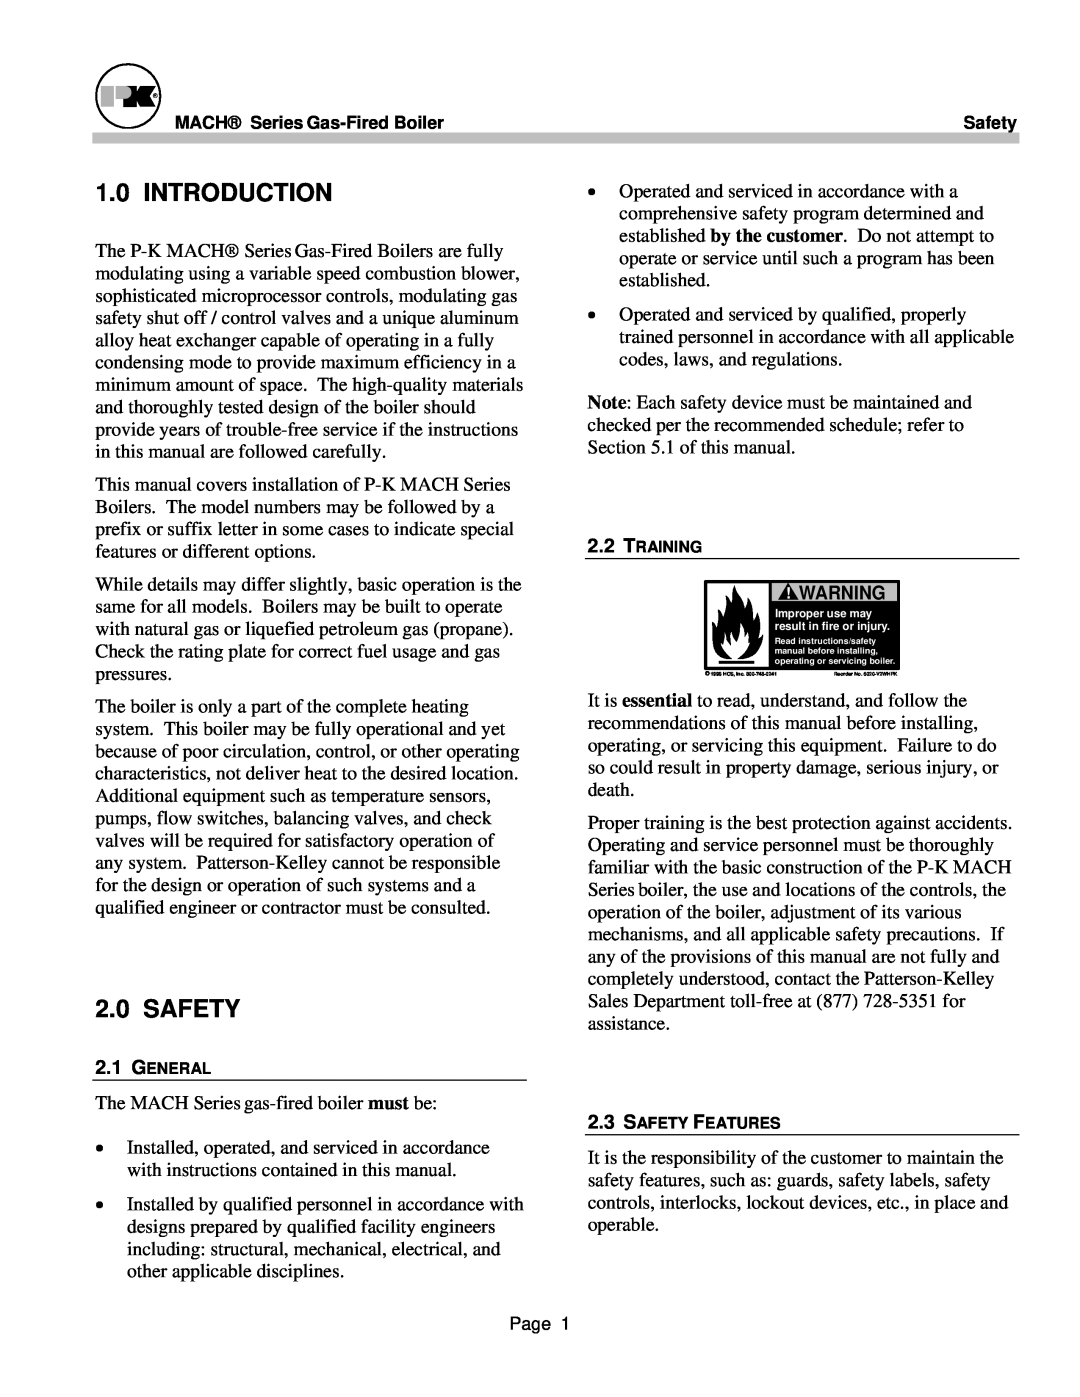 Patterson-Kelley MACH-05 manual Introduction, 2.0SAFETY 